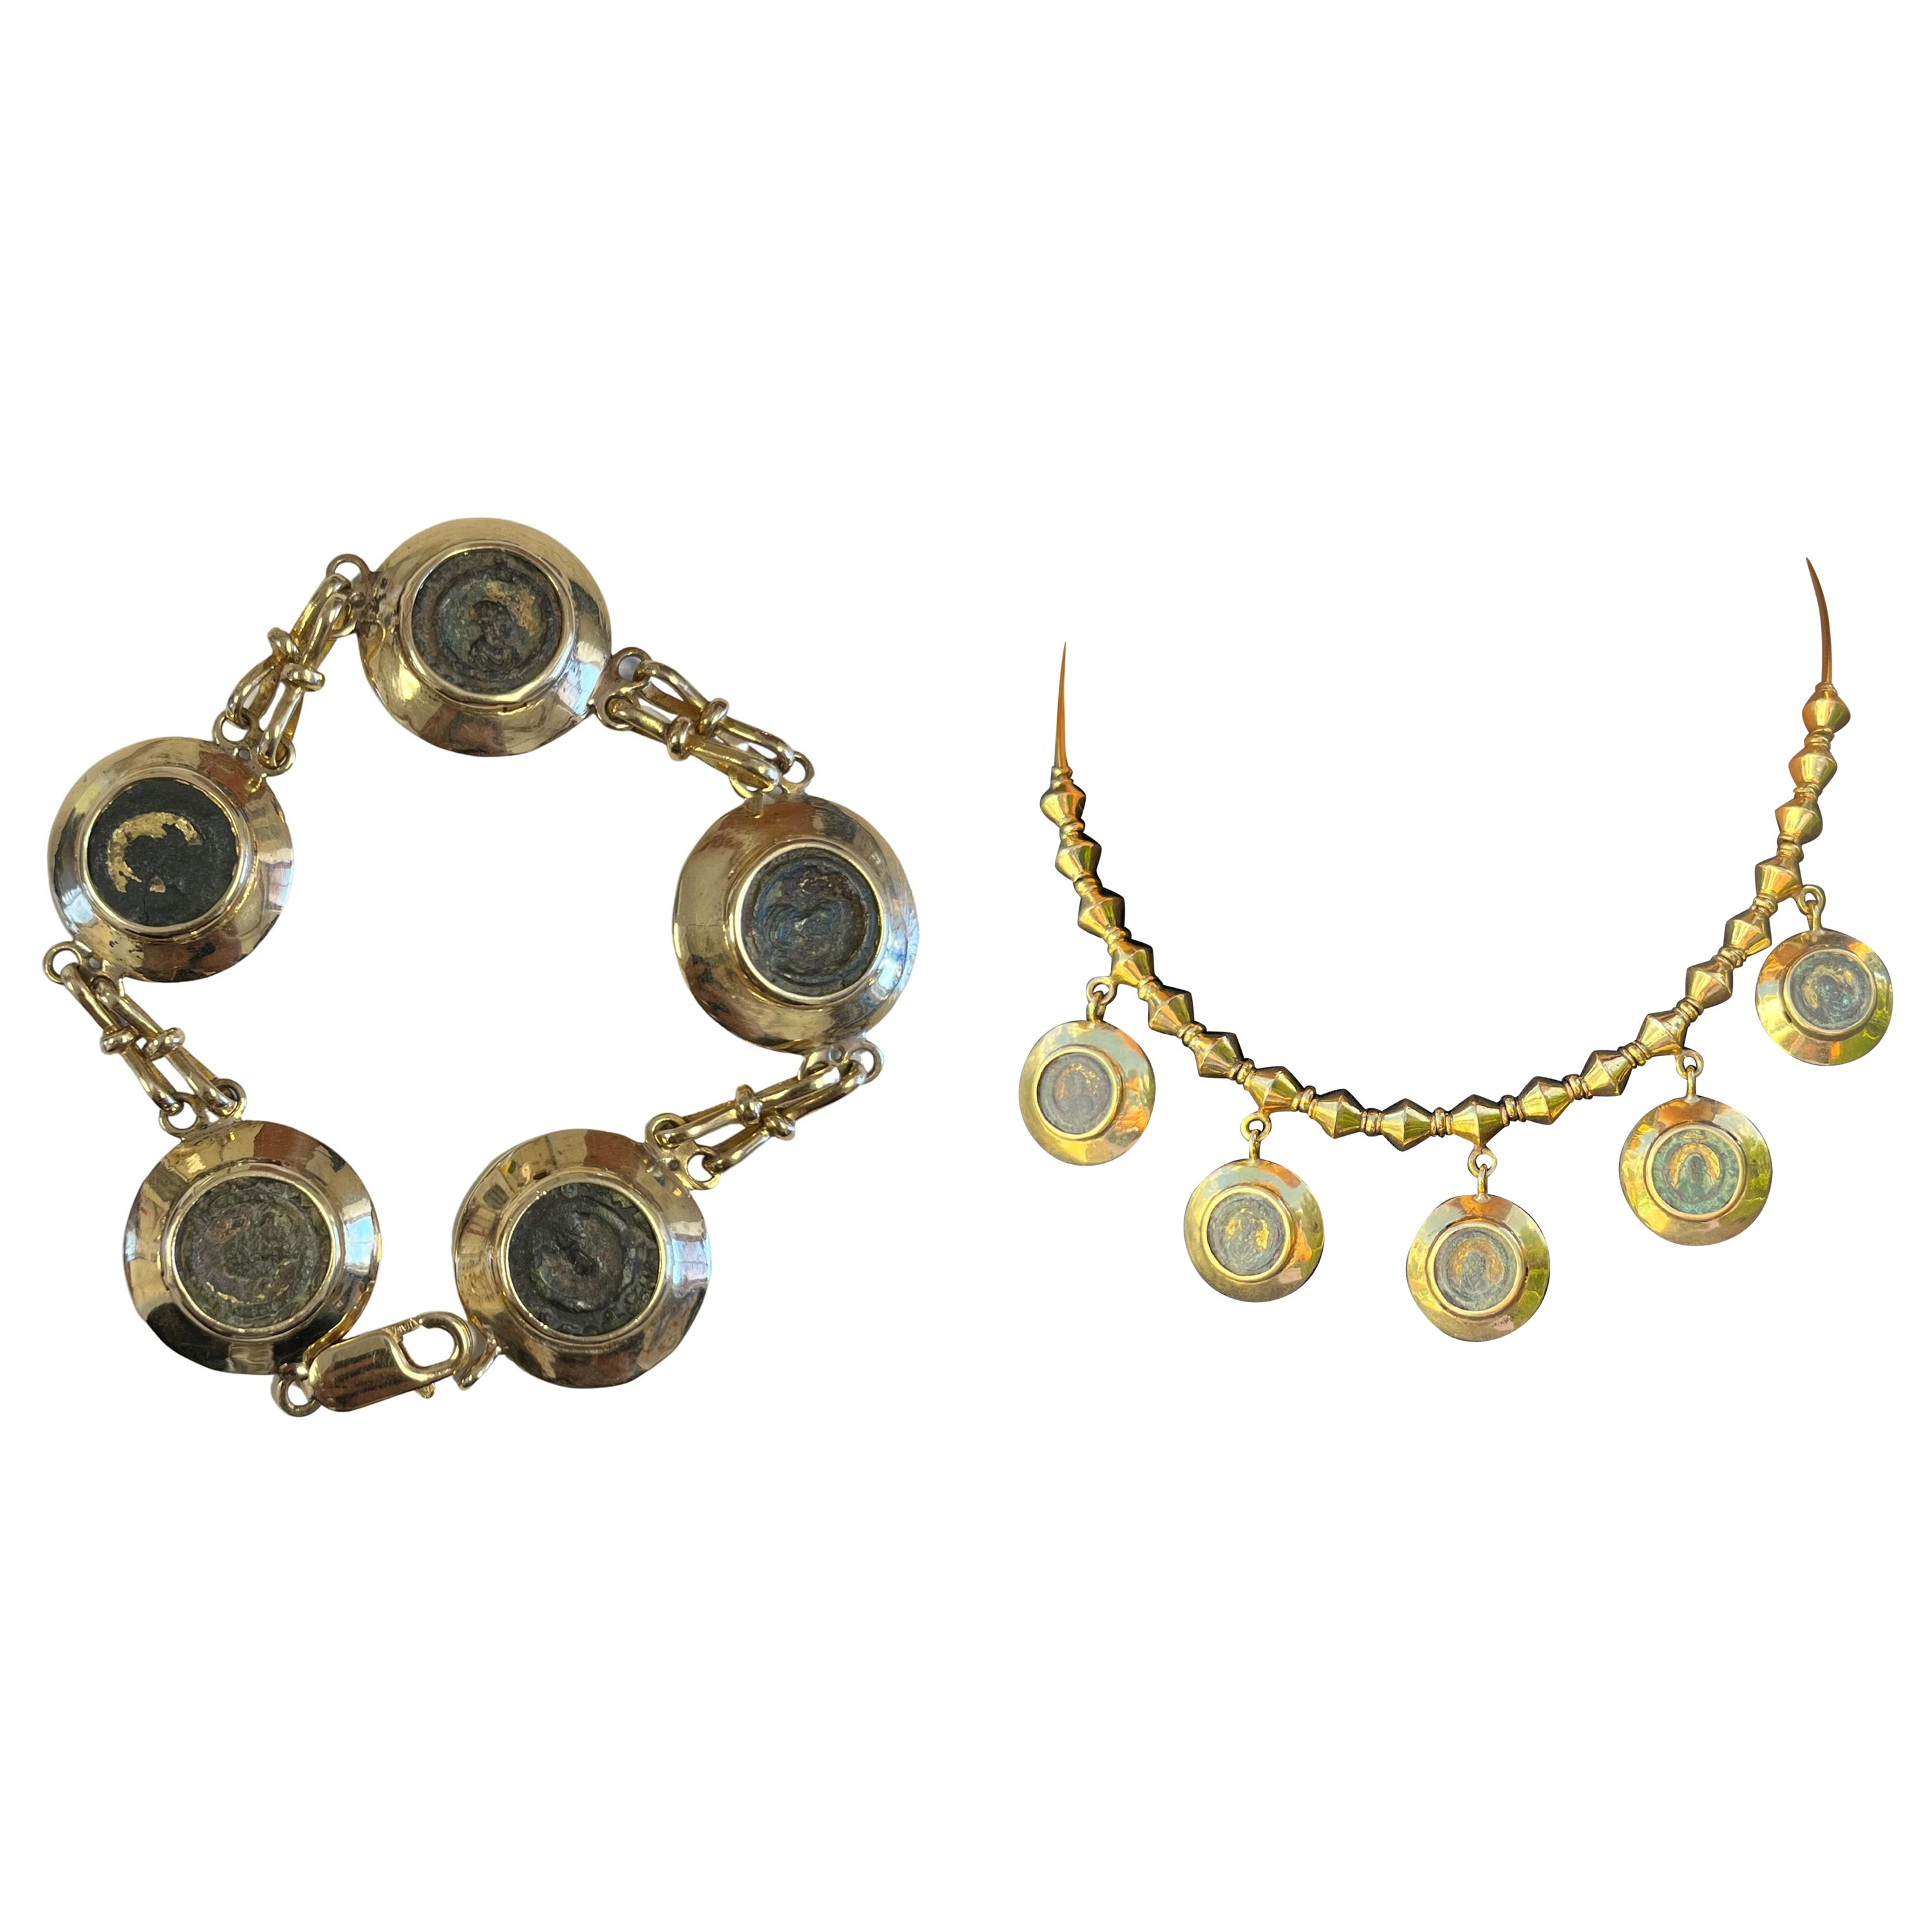 Ancient Axum Gilt Coin Necklace and Bracelet Set in 18k Yellow Gold